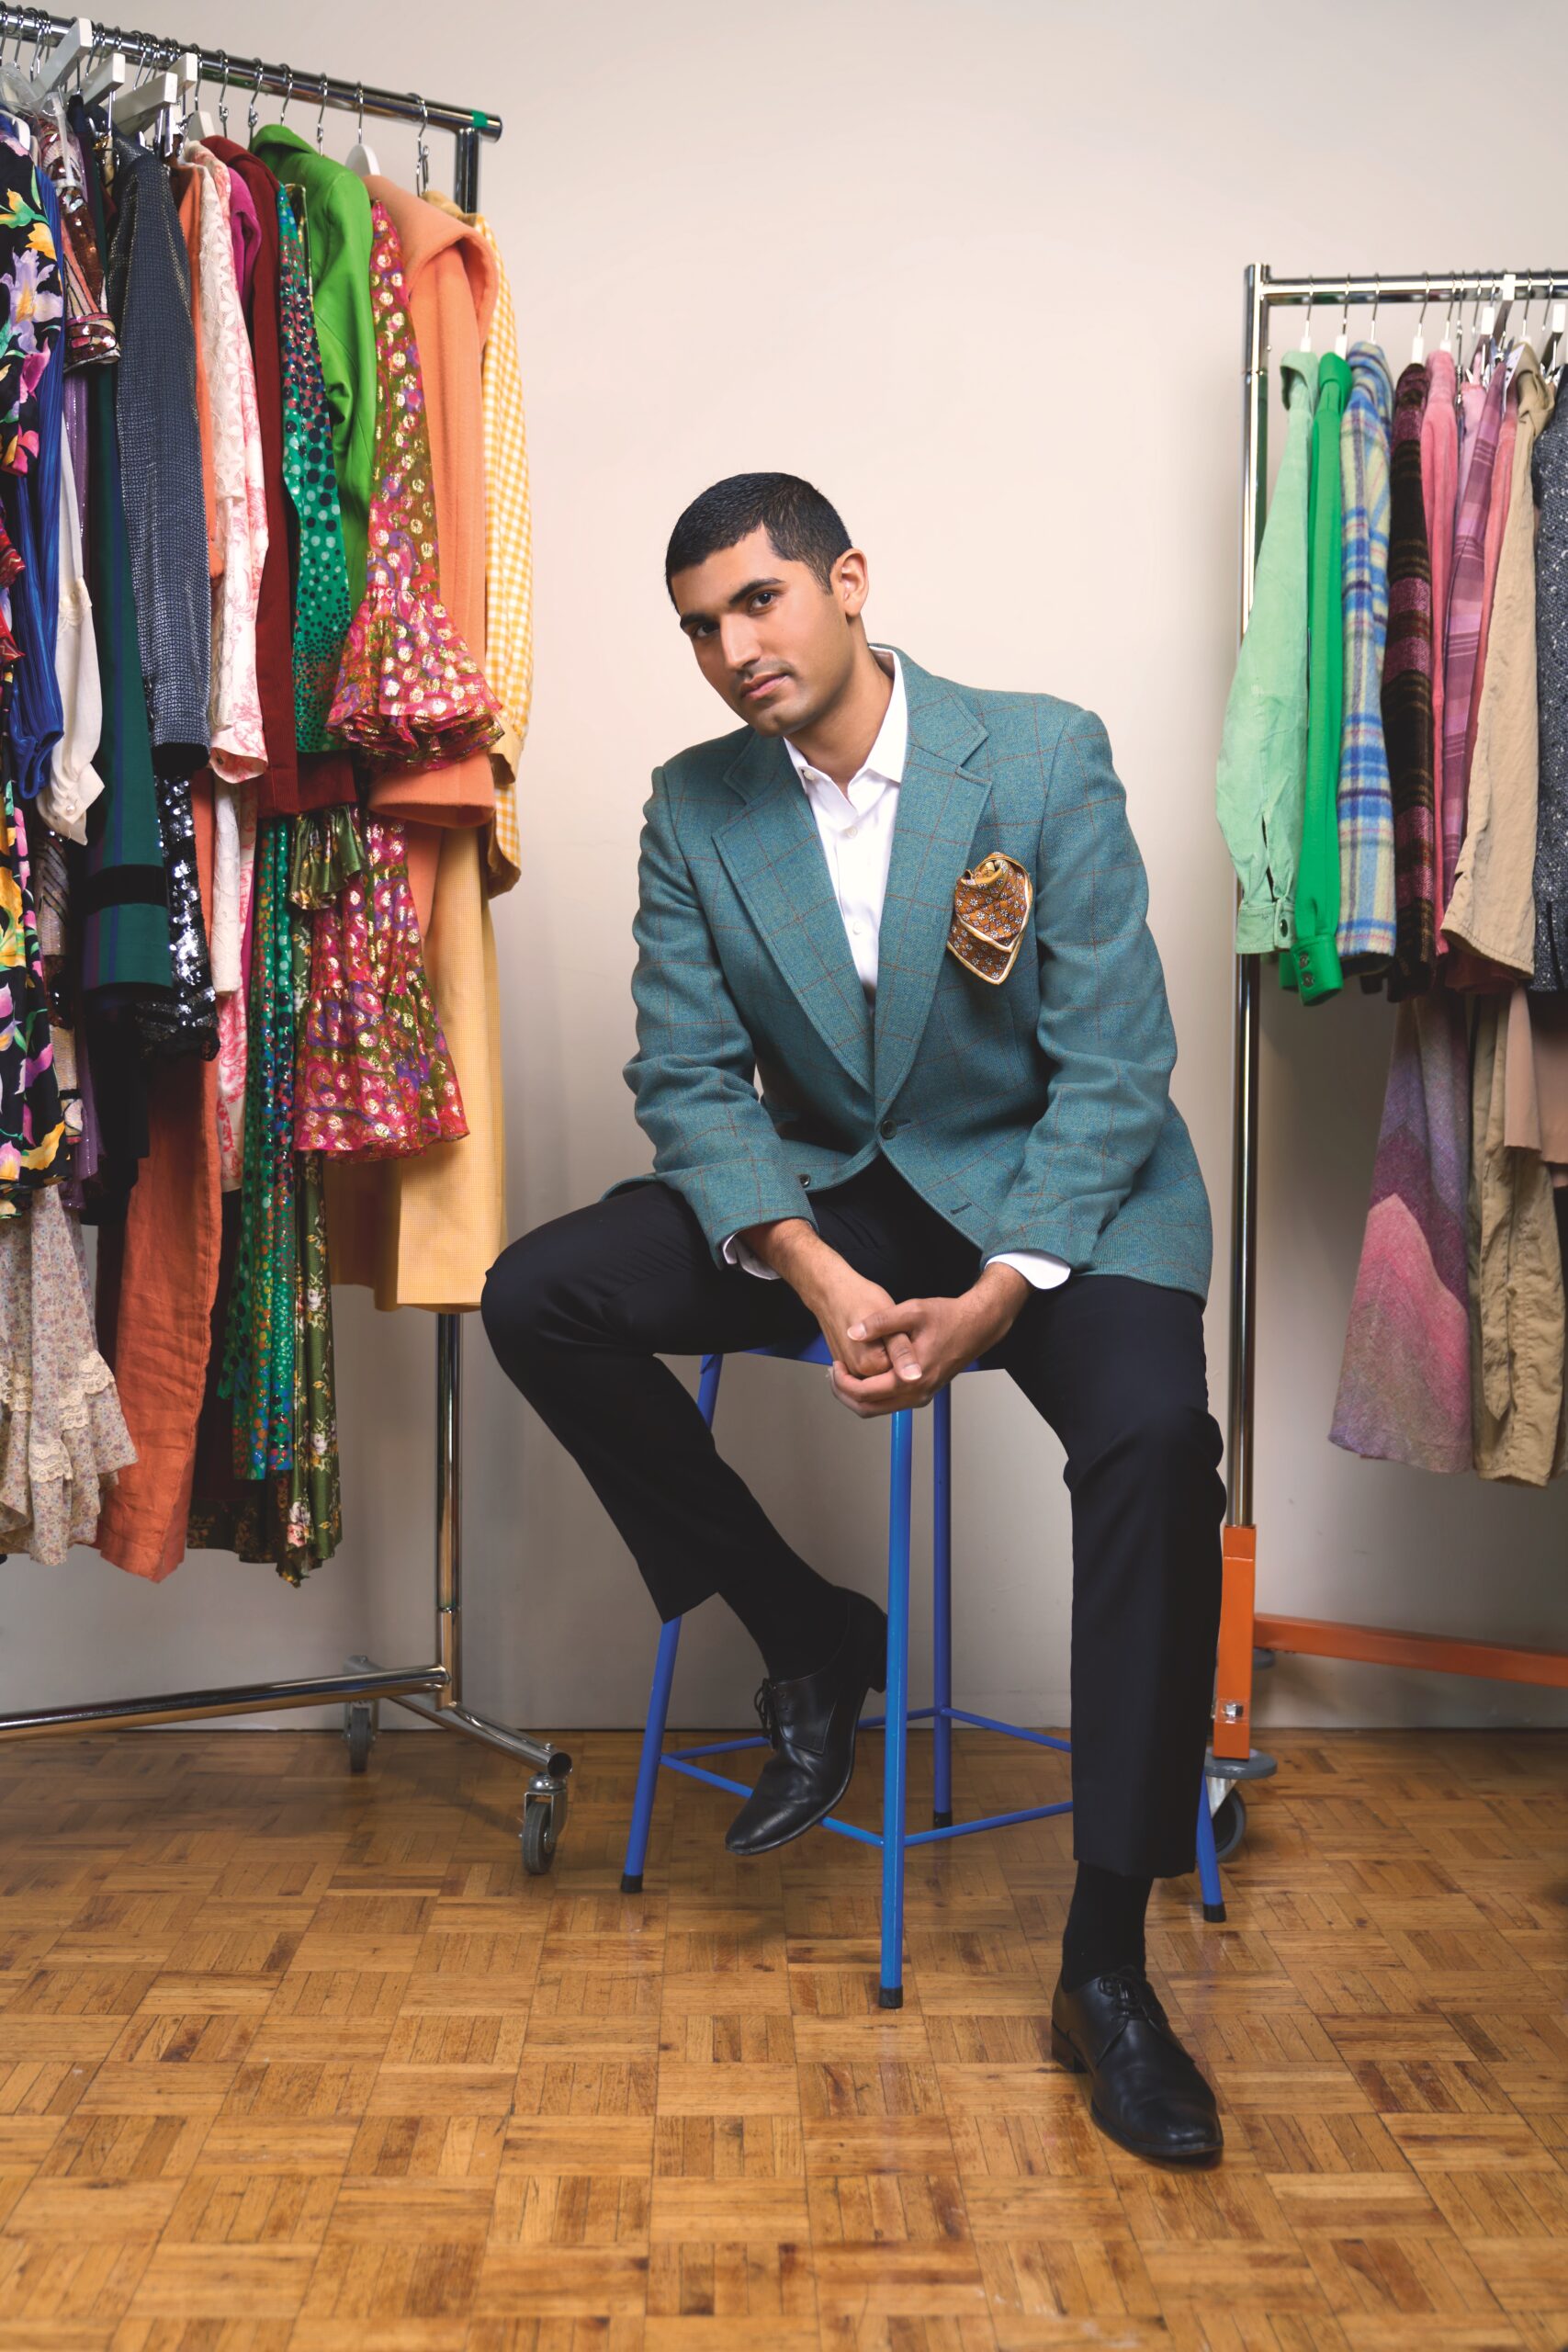 Nofil Nadeem’s ensemble features a green sport coat purchased from Papa Love Vintage, a Banana Republic dress shirt, Ralph Lauren trousers and vintage oxford shoes that he bought in Pakistan. The scarf in his pocket, supplied by Nouveau Riche Vintage, adds a bit of extra colour to the outfit.